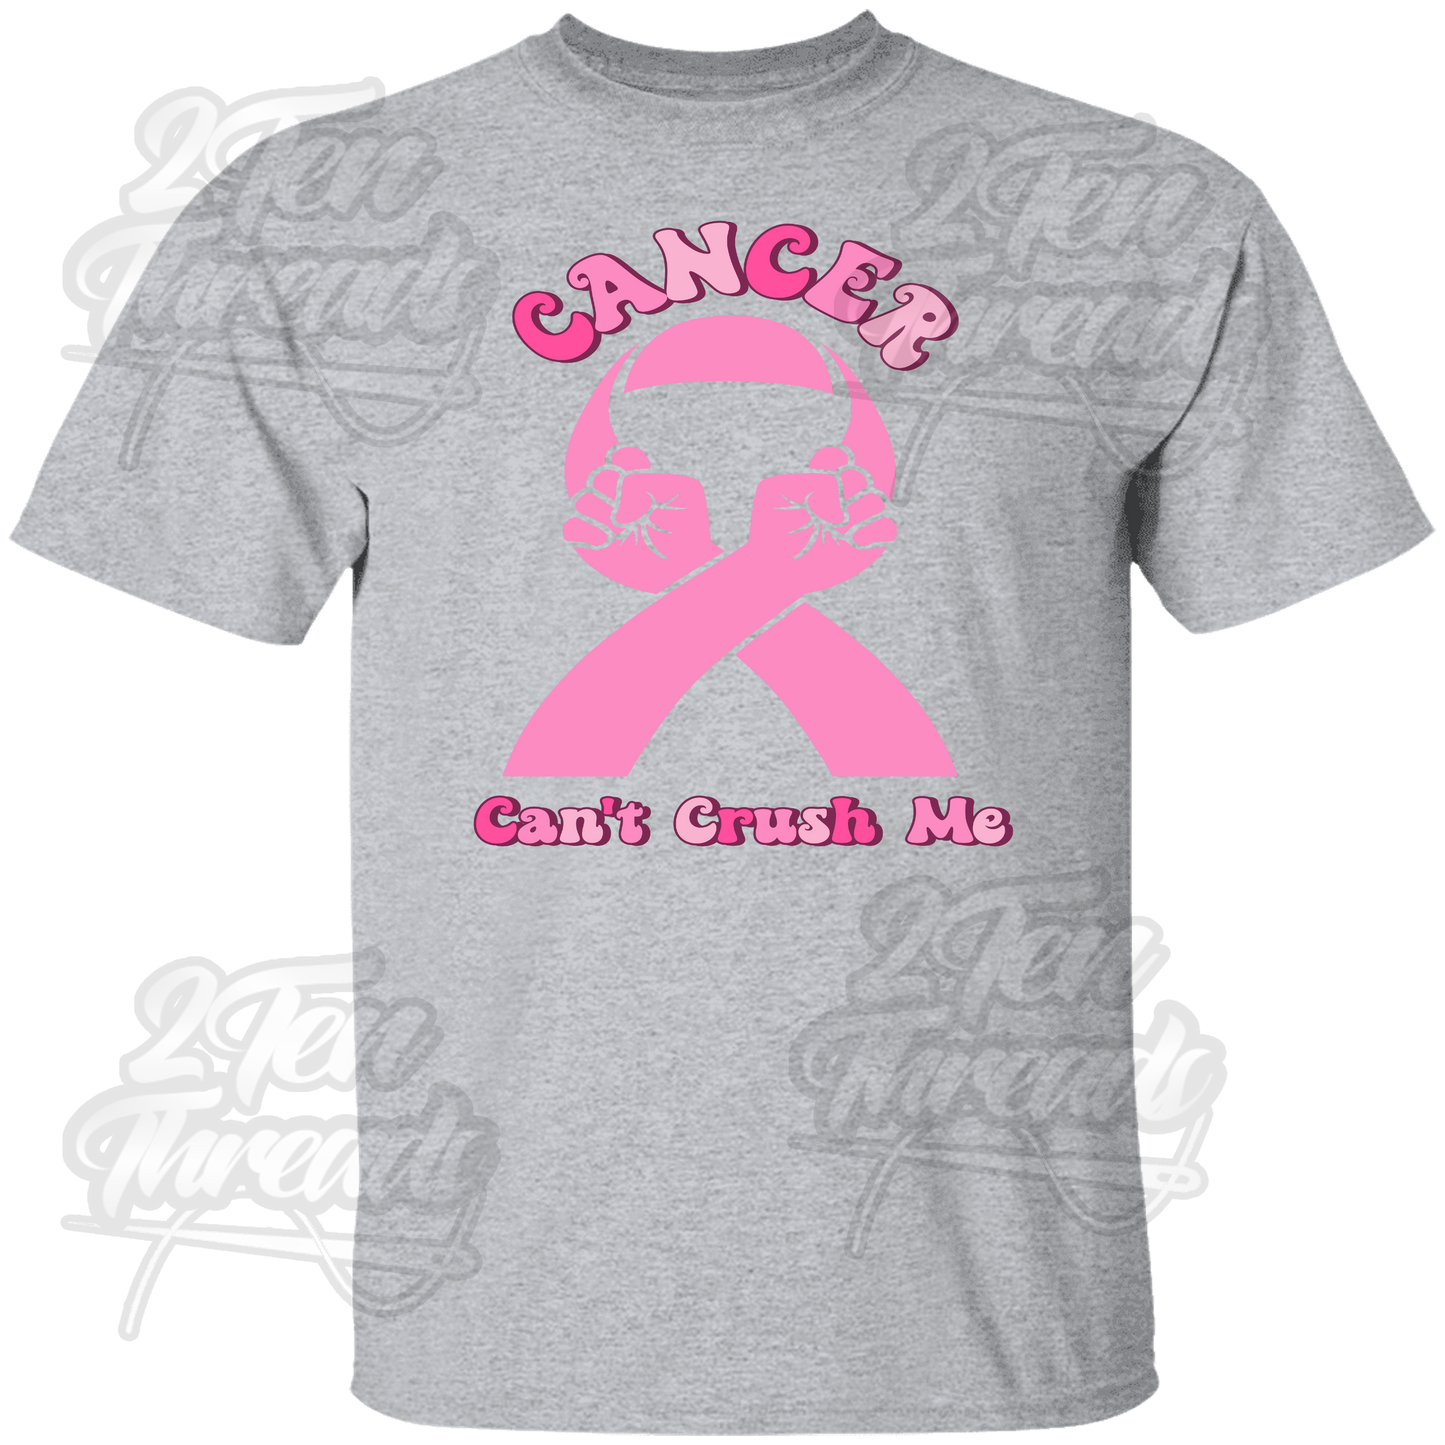 Cancer Cant Crush Me Shirt